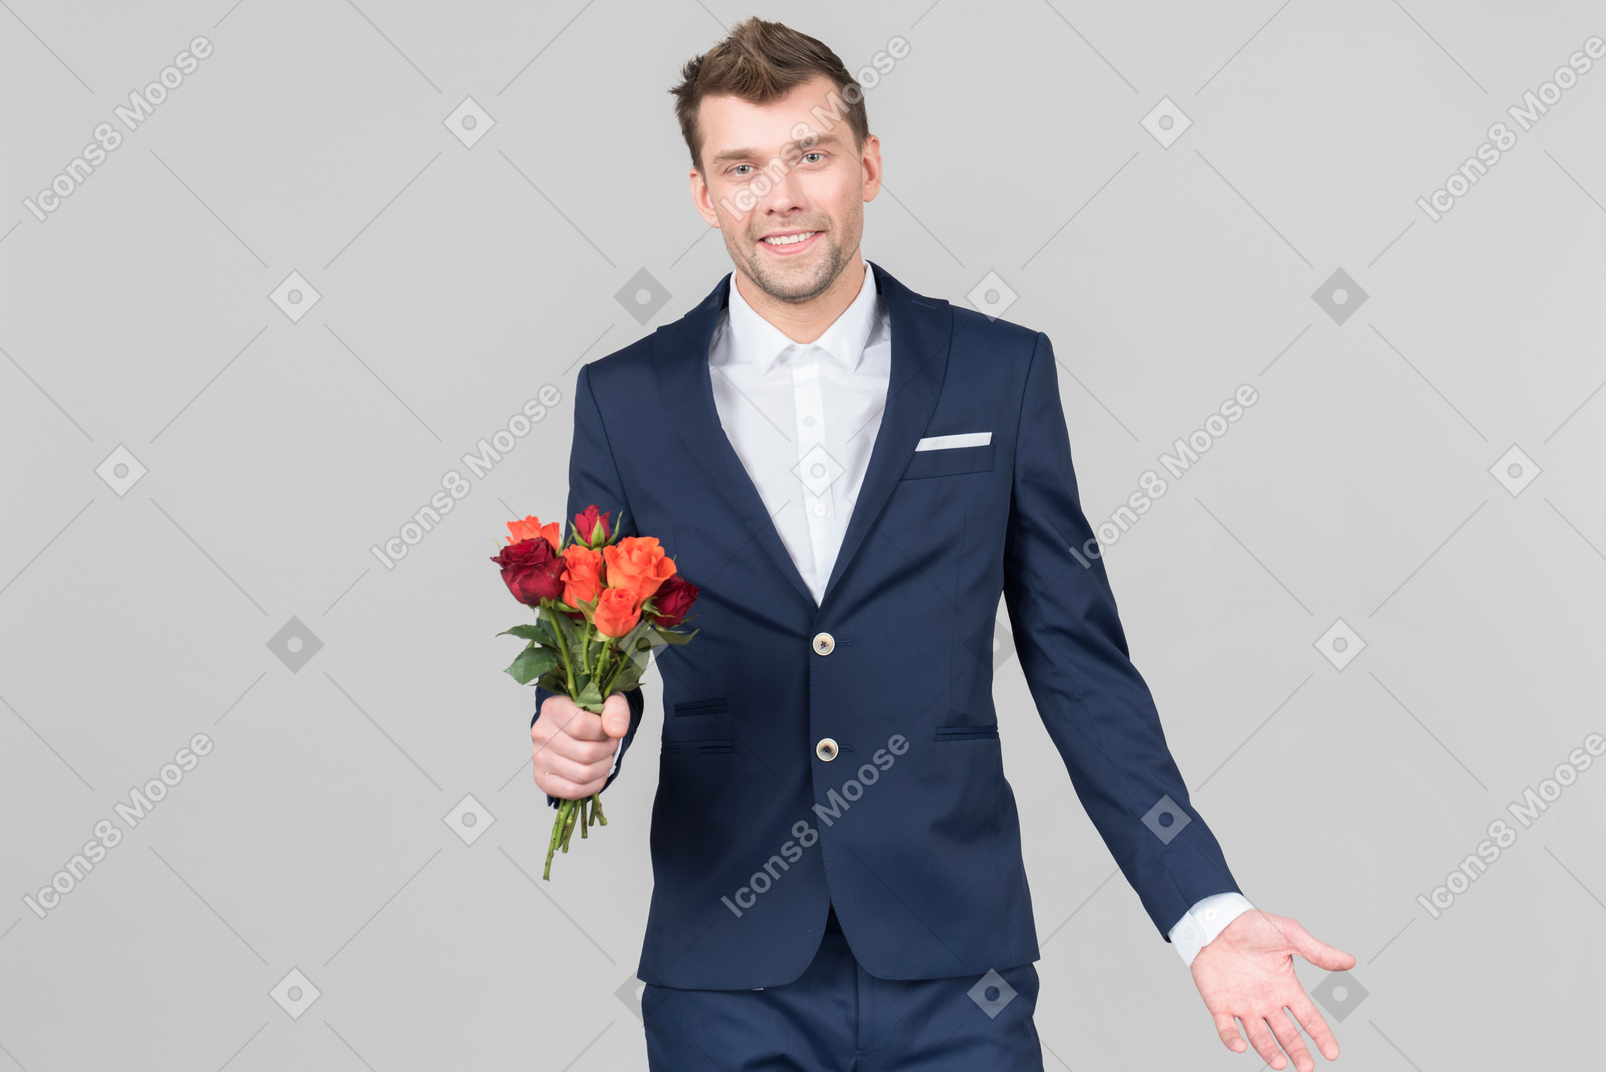 These roses are for you